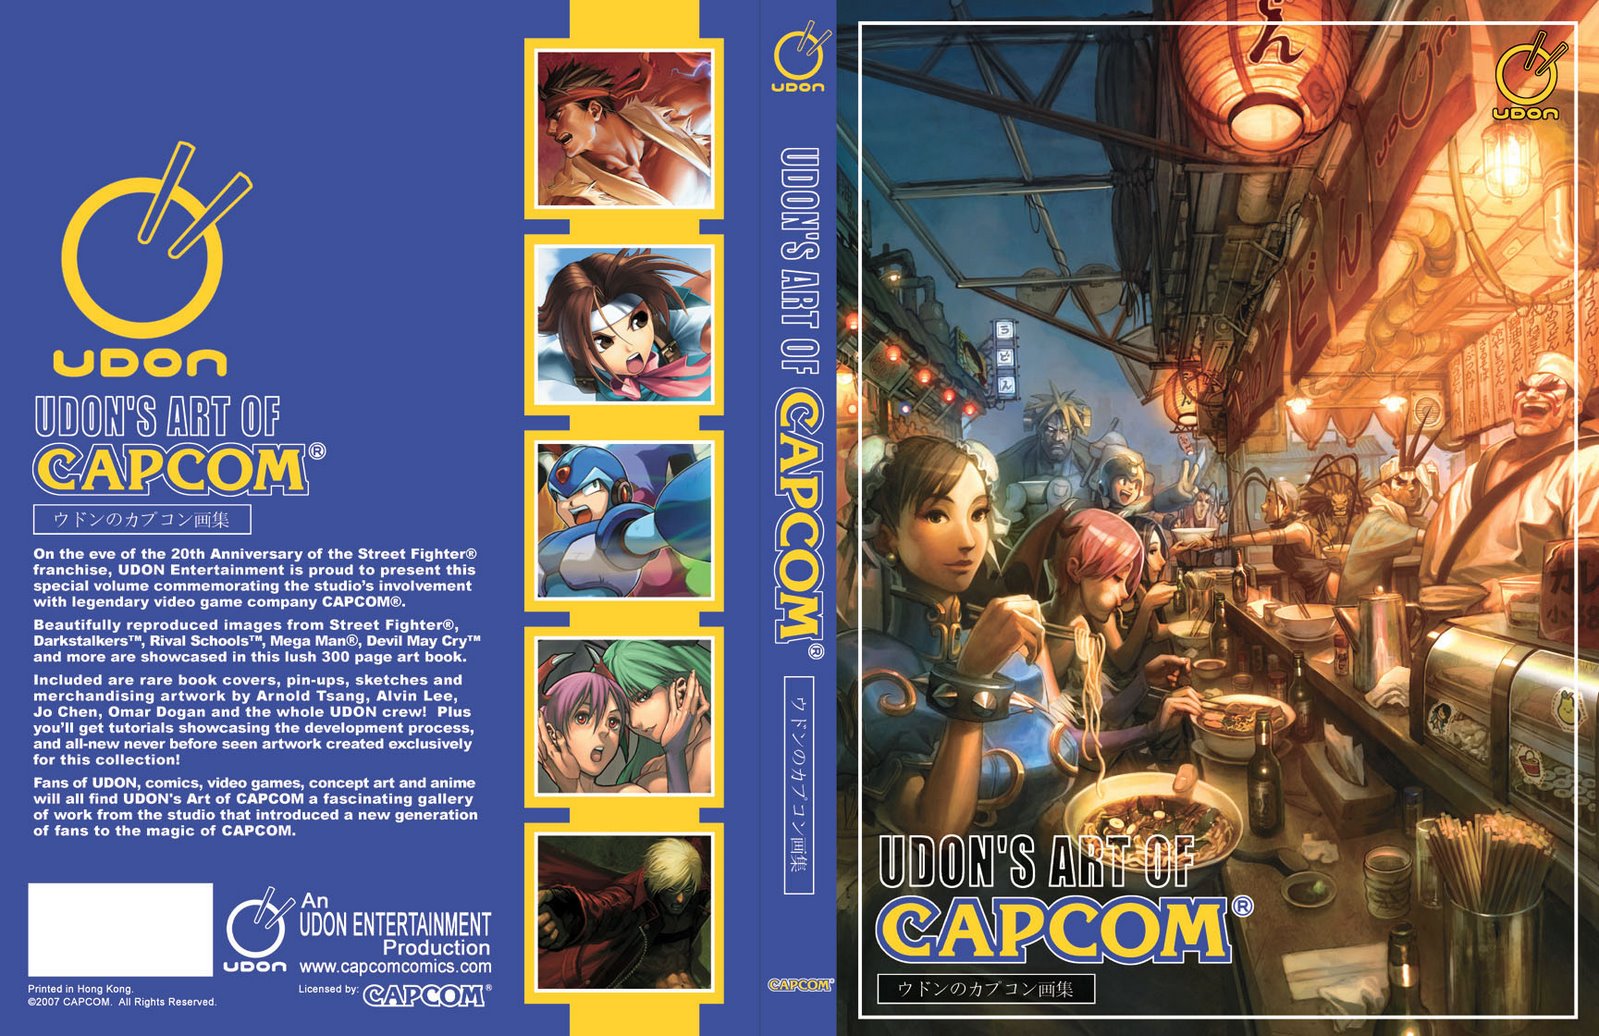 [UDON__s_Art_of_Capcom_Cover_by_UdonCrew.jpg]